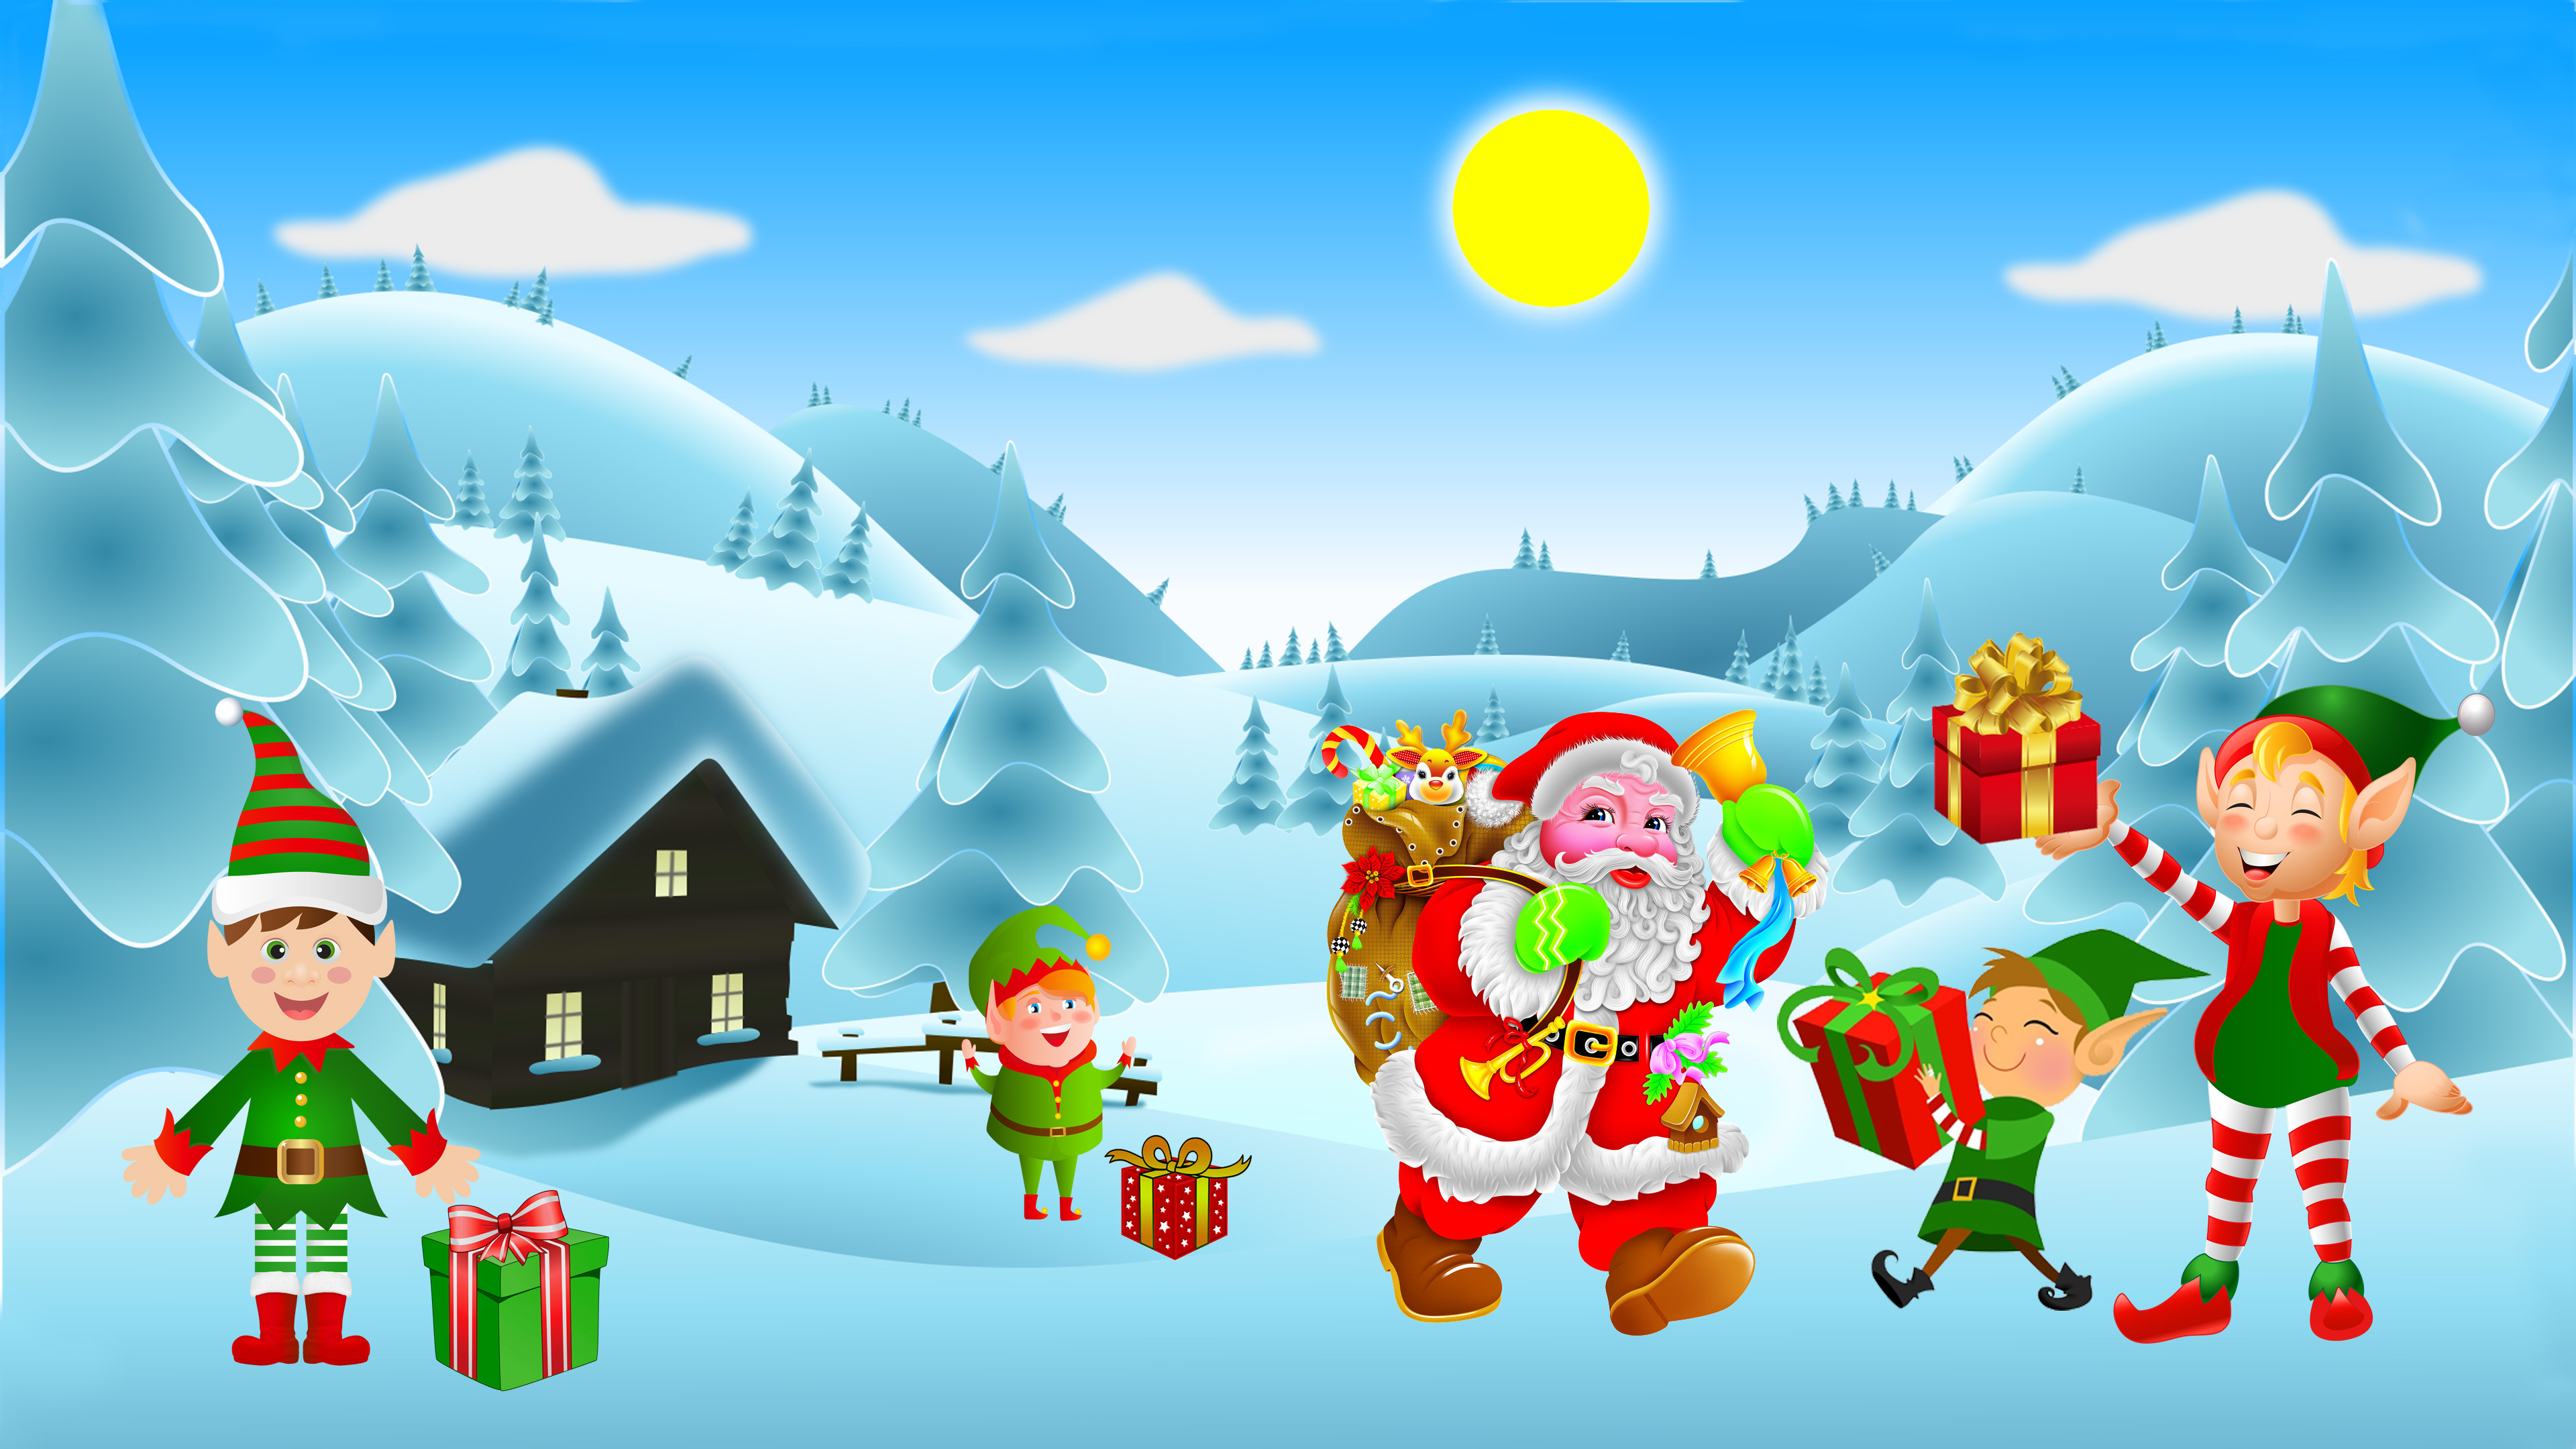 Search Results for live christmas wallpapers for android tablets   Adorable Wallpape  Christmas live wallpaper Christmas wallpaper android Christmas  wallpaper